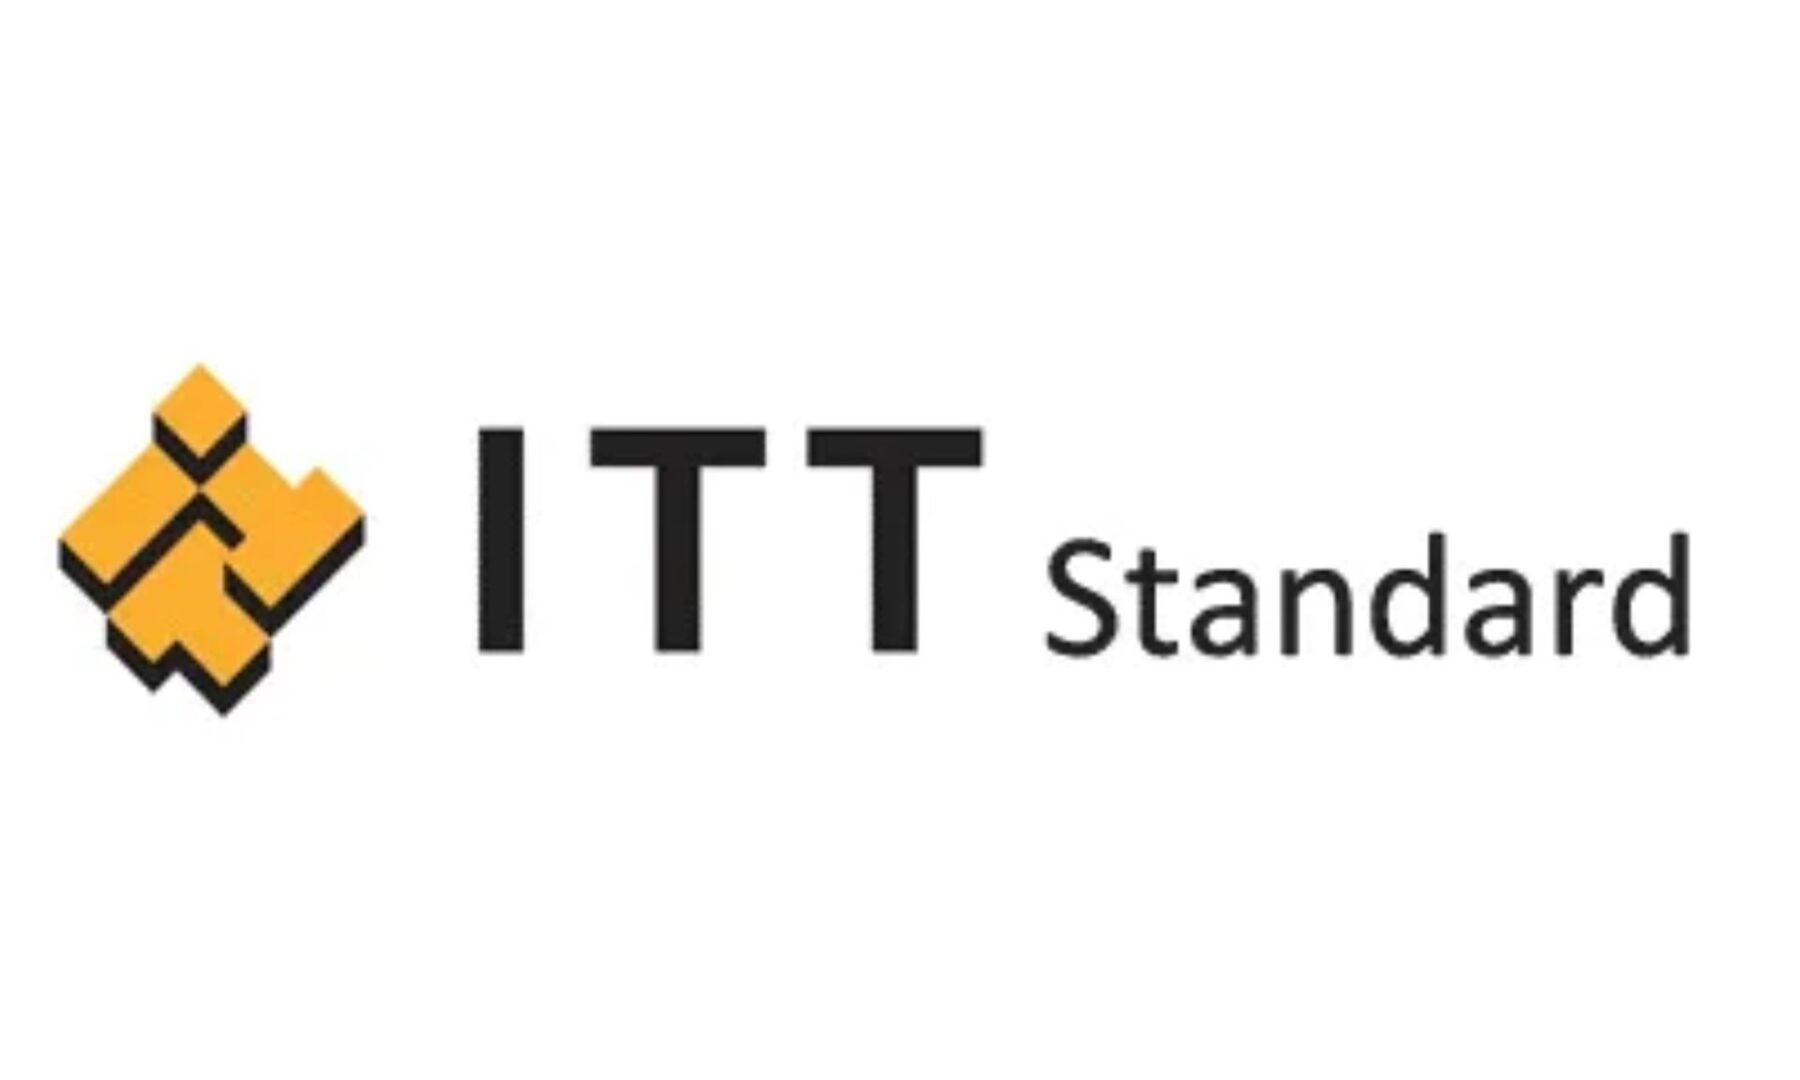 A black and white logo of the company pitt stands for.